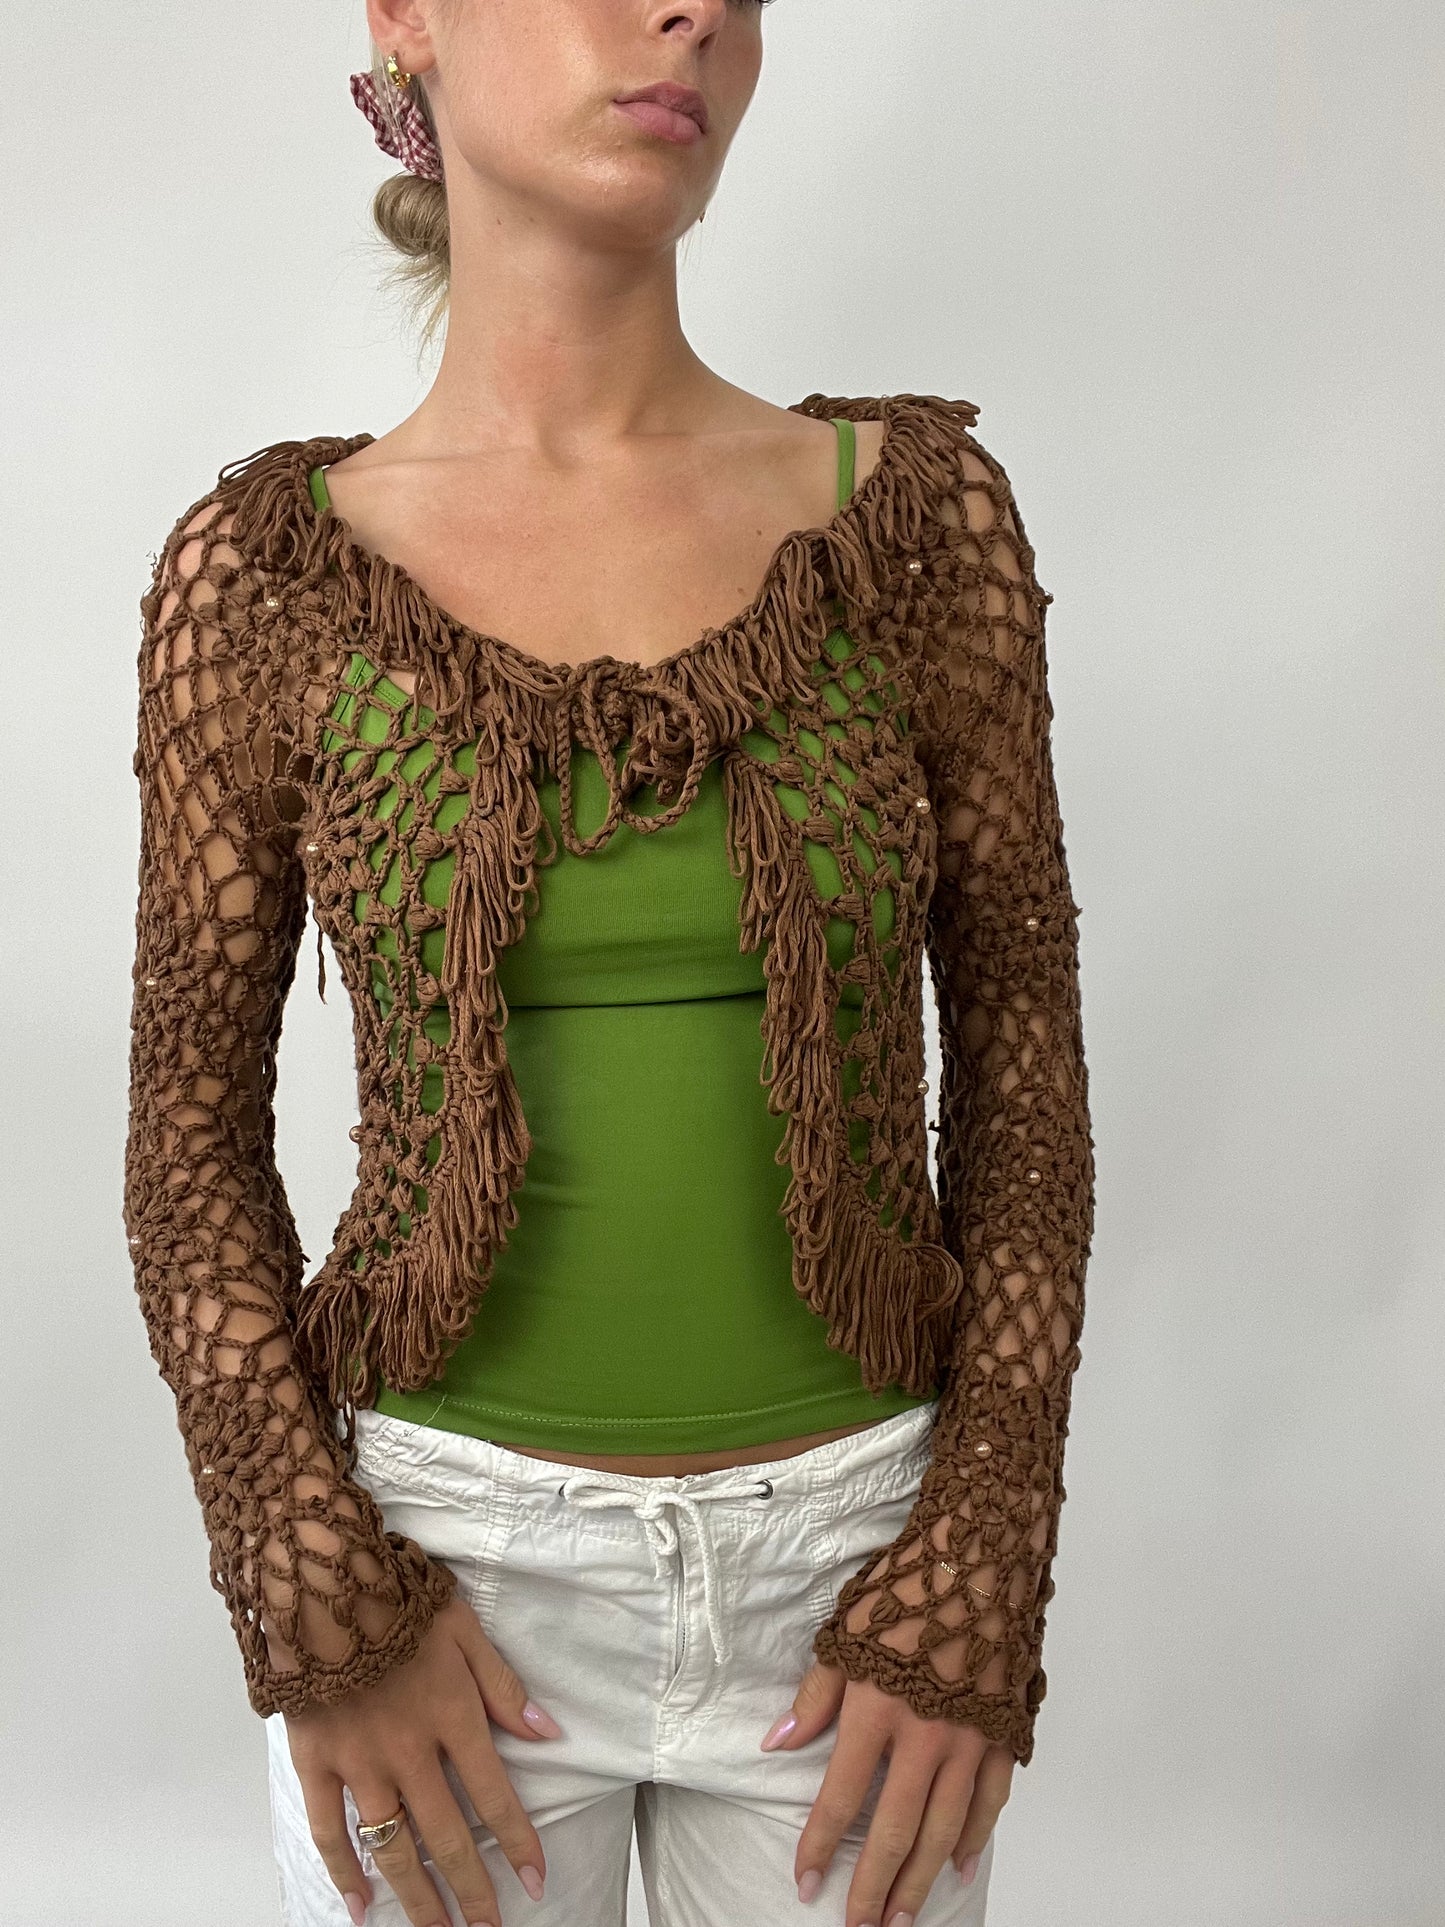 PUB GARDEN DROP | small brown crochet cardigan with frill detail